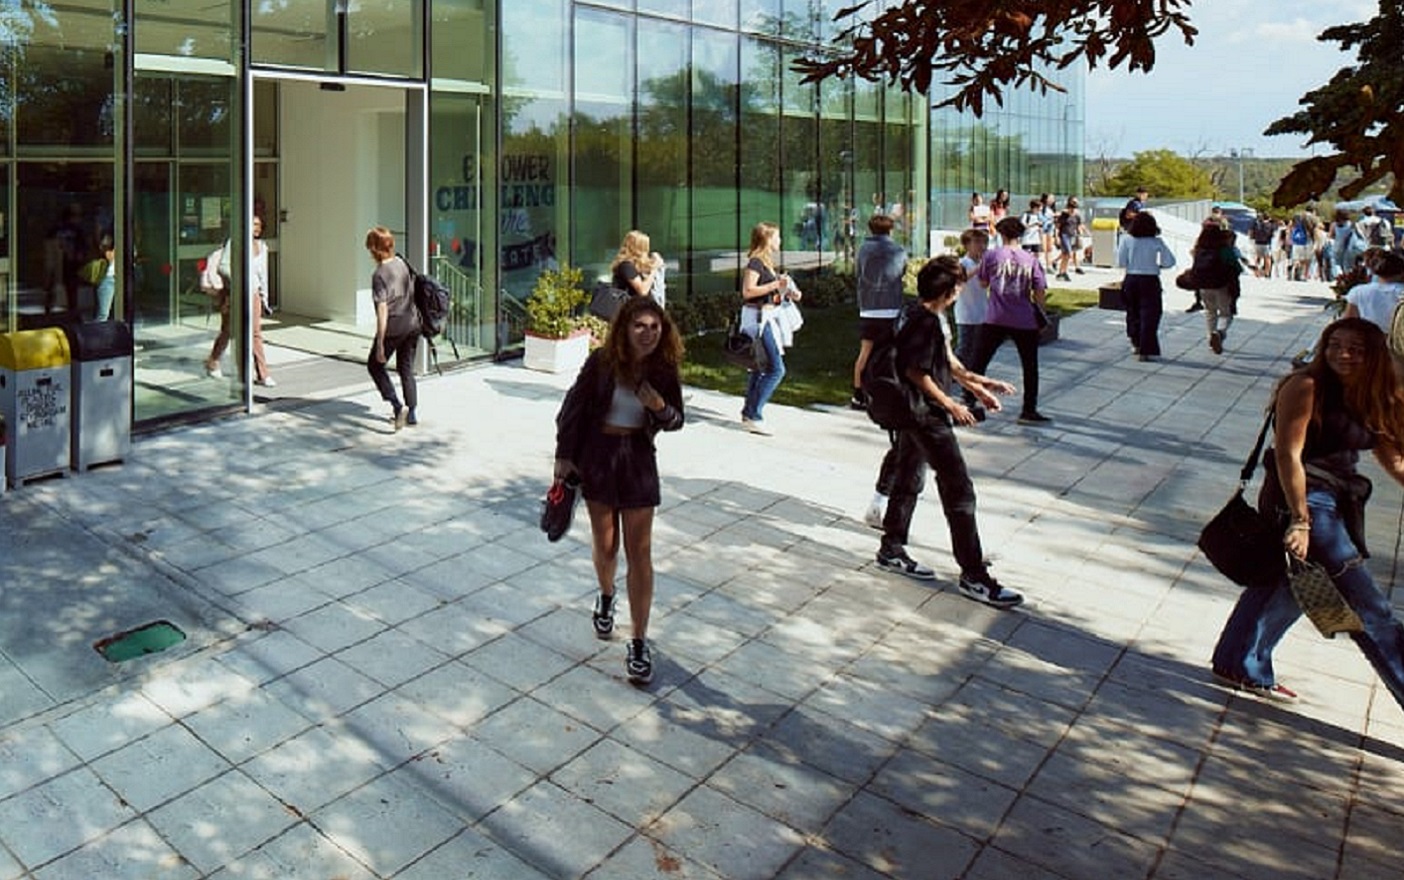 Students leaving campus building.